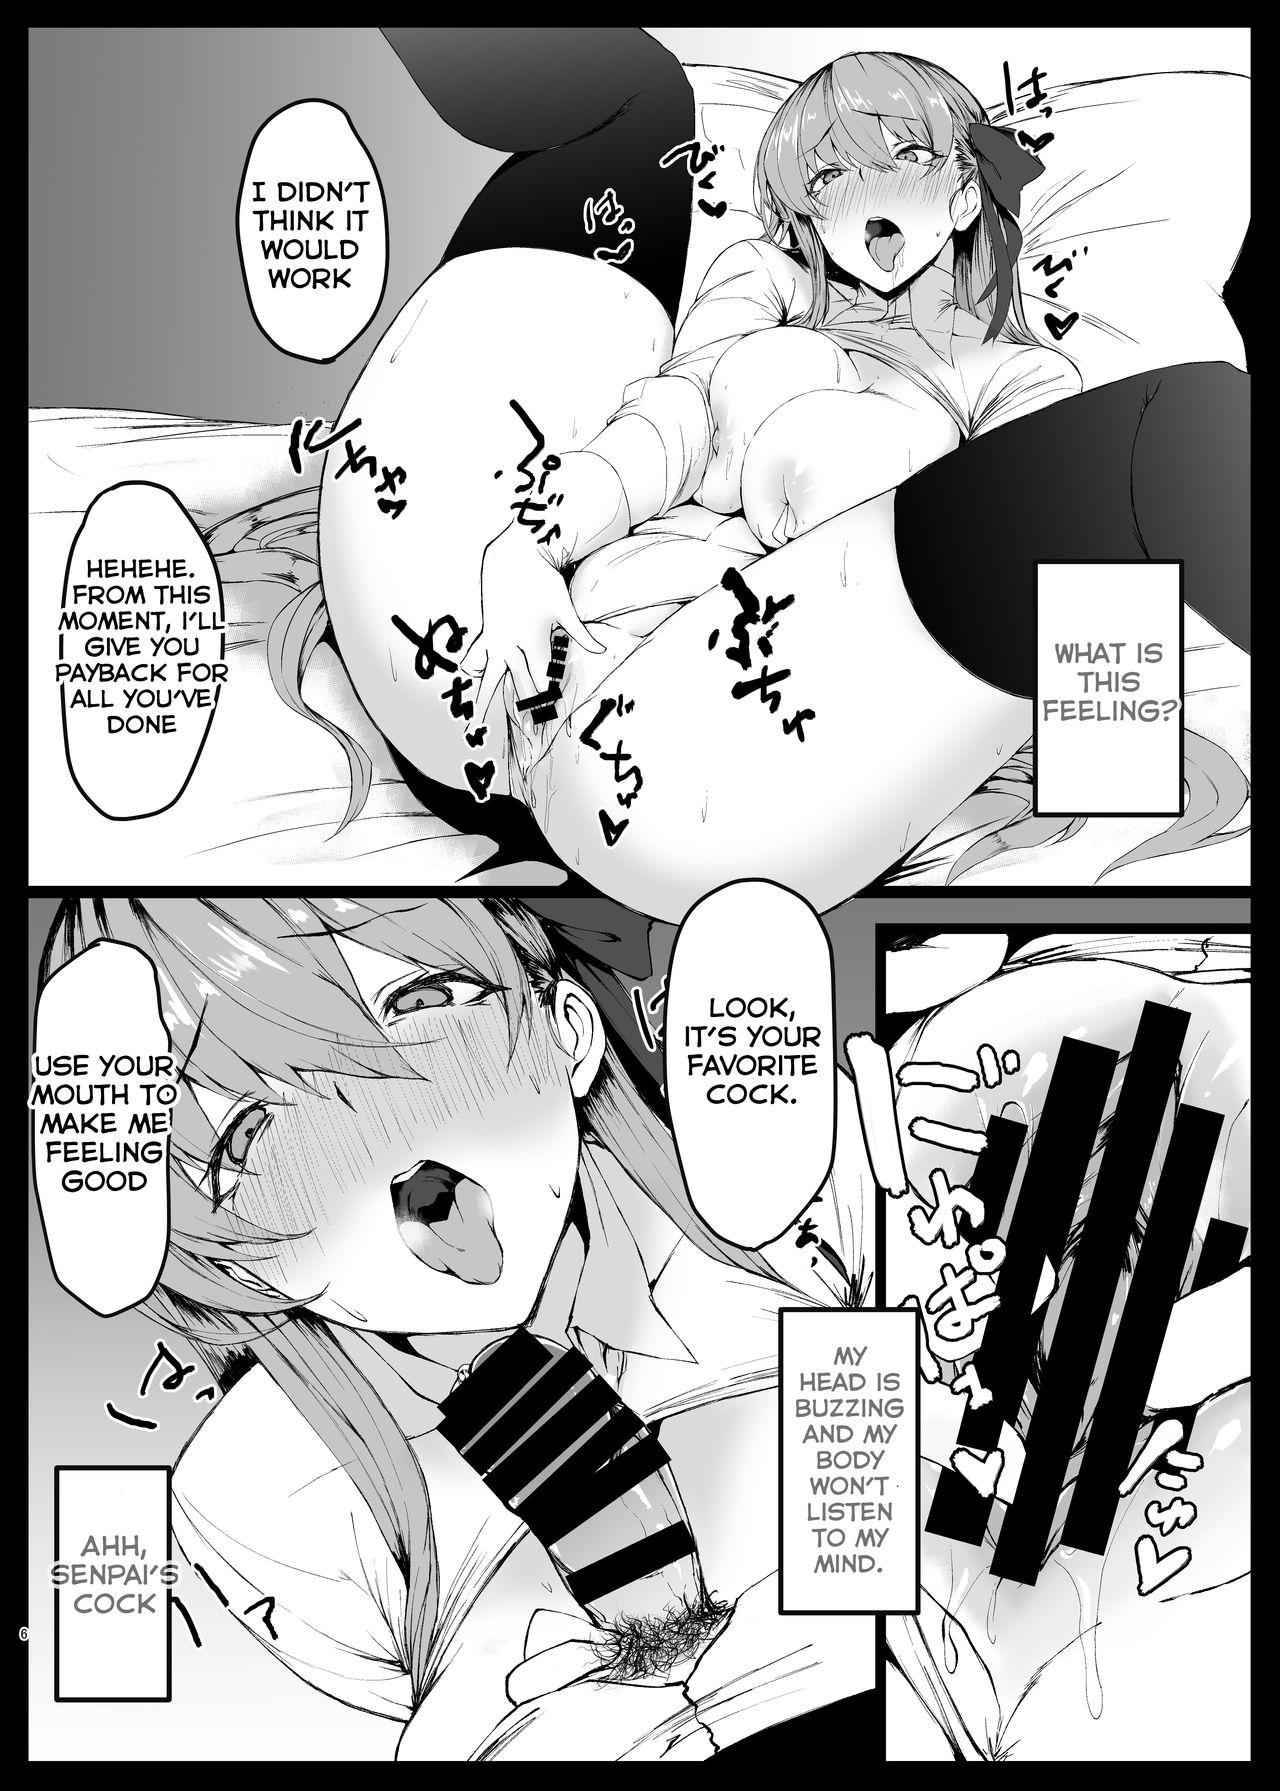 Twinks VIOLATE A SANCTUARY 2 - Fate grand order Hot Girl Fucking - Page 6